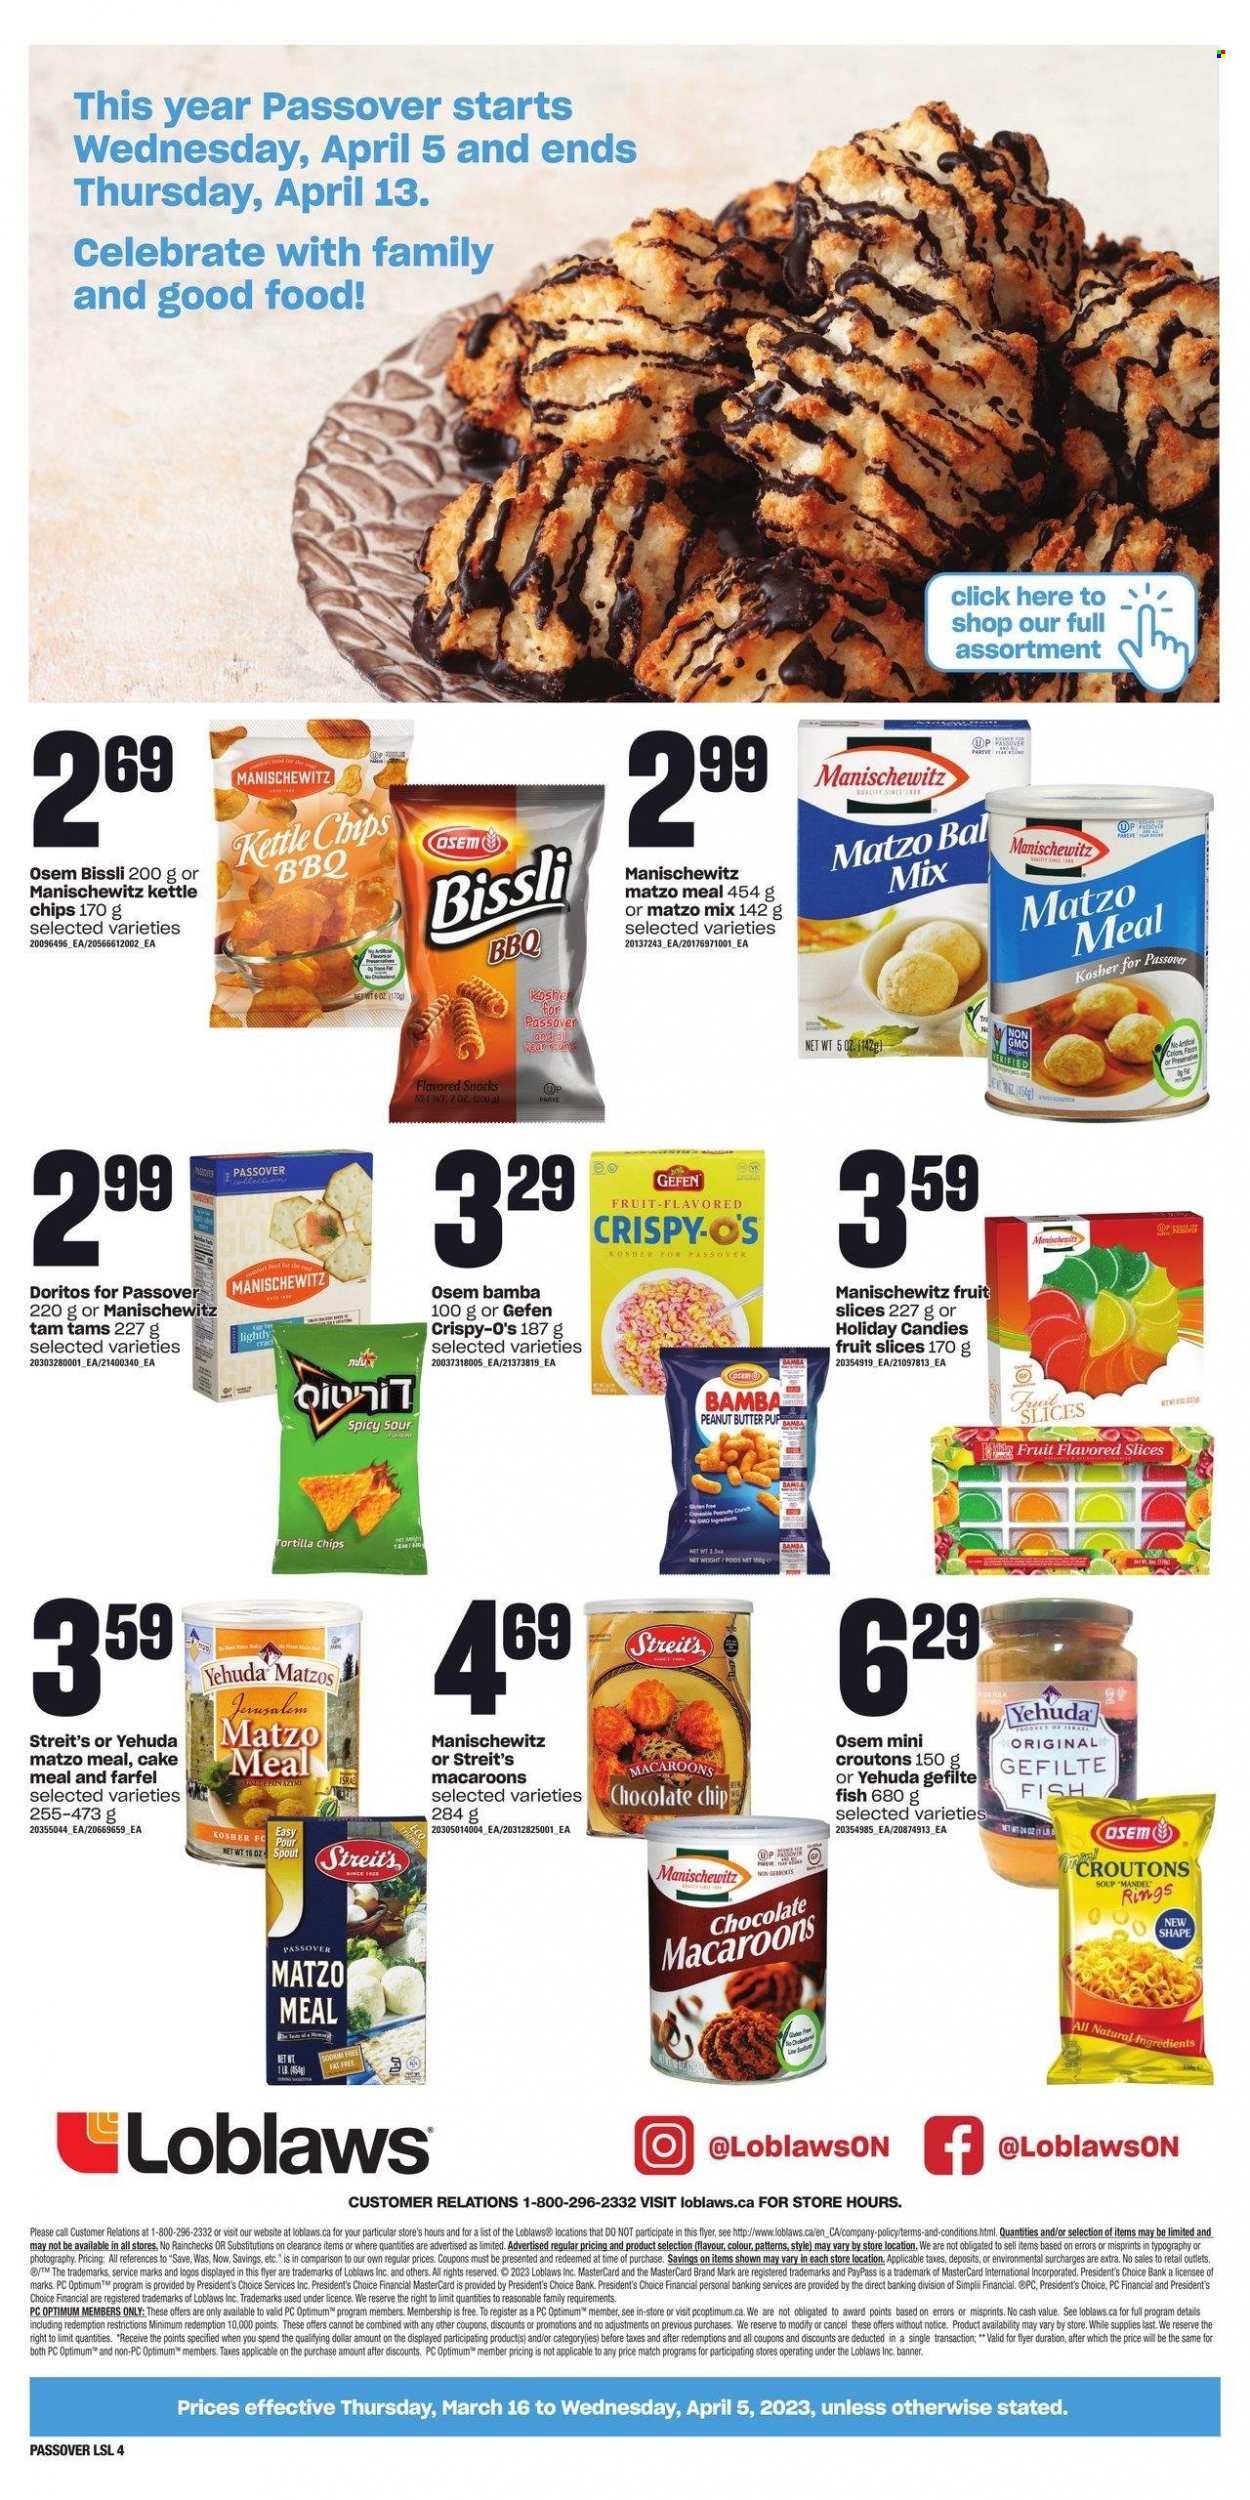 thumbnail - Loblaws Flyer - March 16, 2023 - April 05, 2023 - Sales products - cake, macaroons, fish, soup, chocolate chips, snack, fruit slices, Doritos, tortilla chips, chips, Bamba, Kettle chips, croutons, matzo meal, peanut butter, Optimum. Page 4.